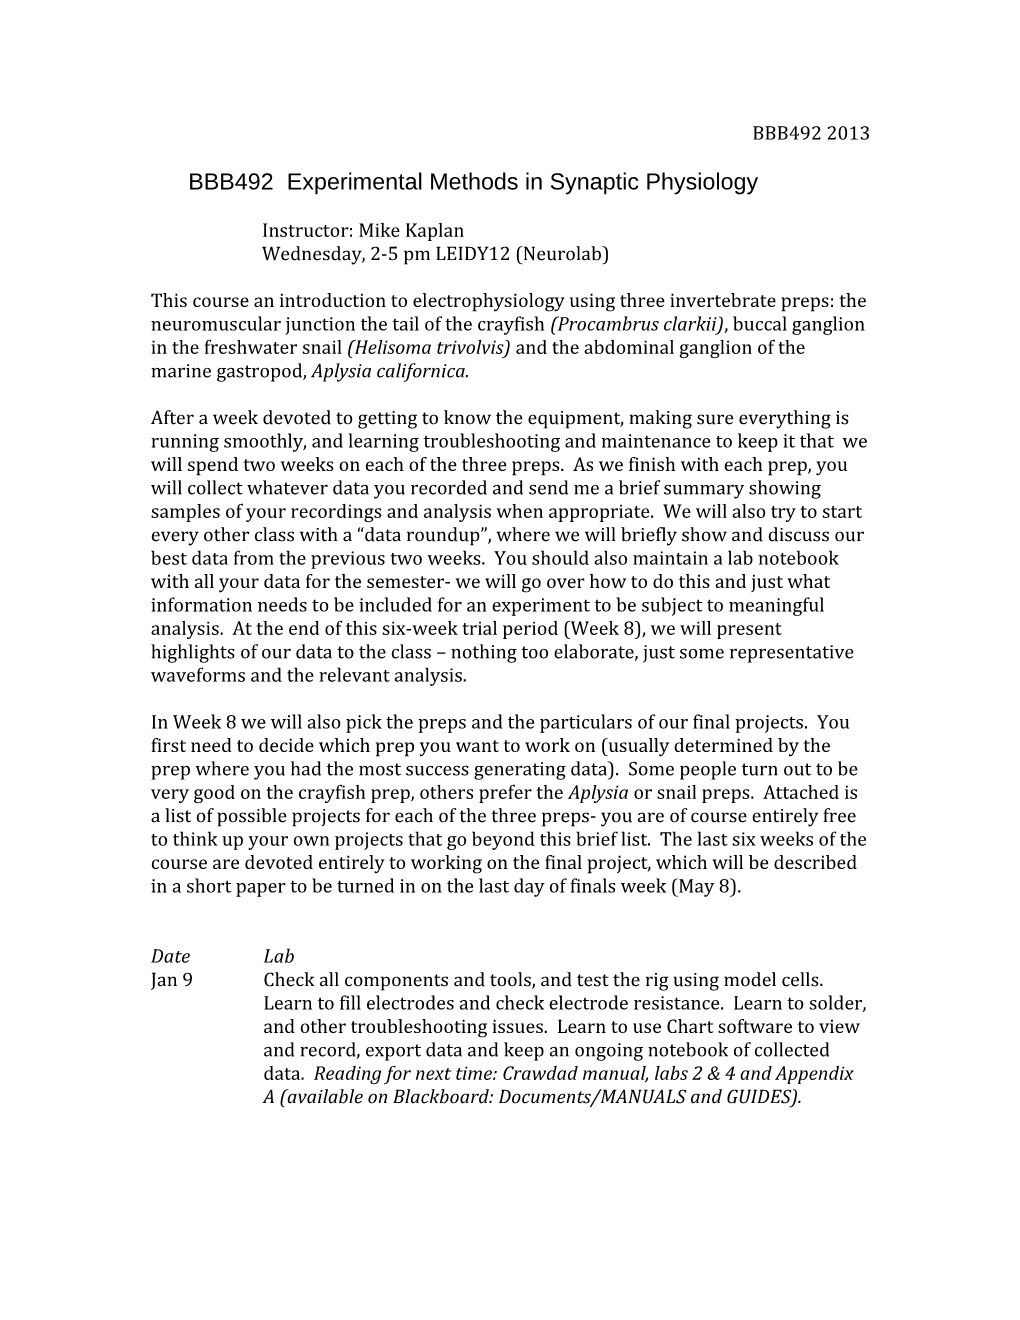 BBB492 Experimental Methods in Synaptic Physiology